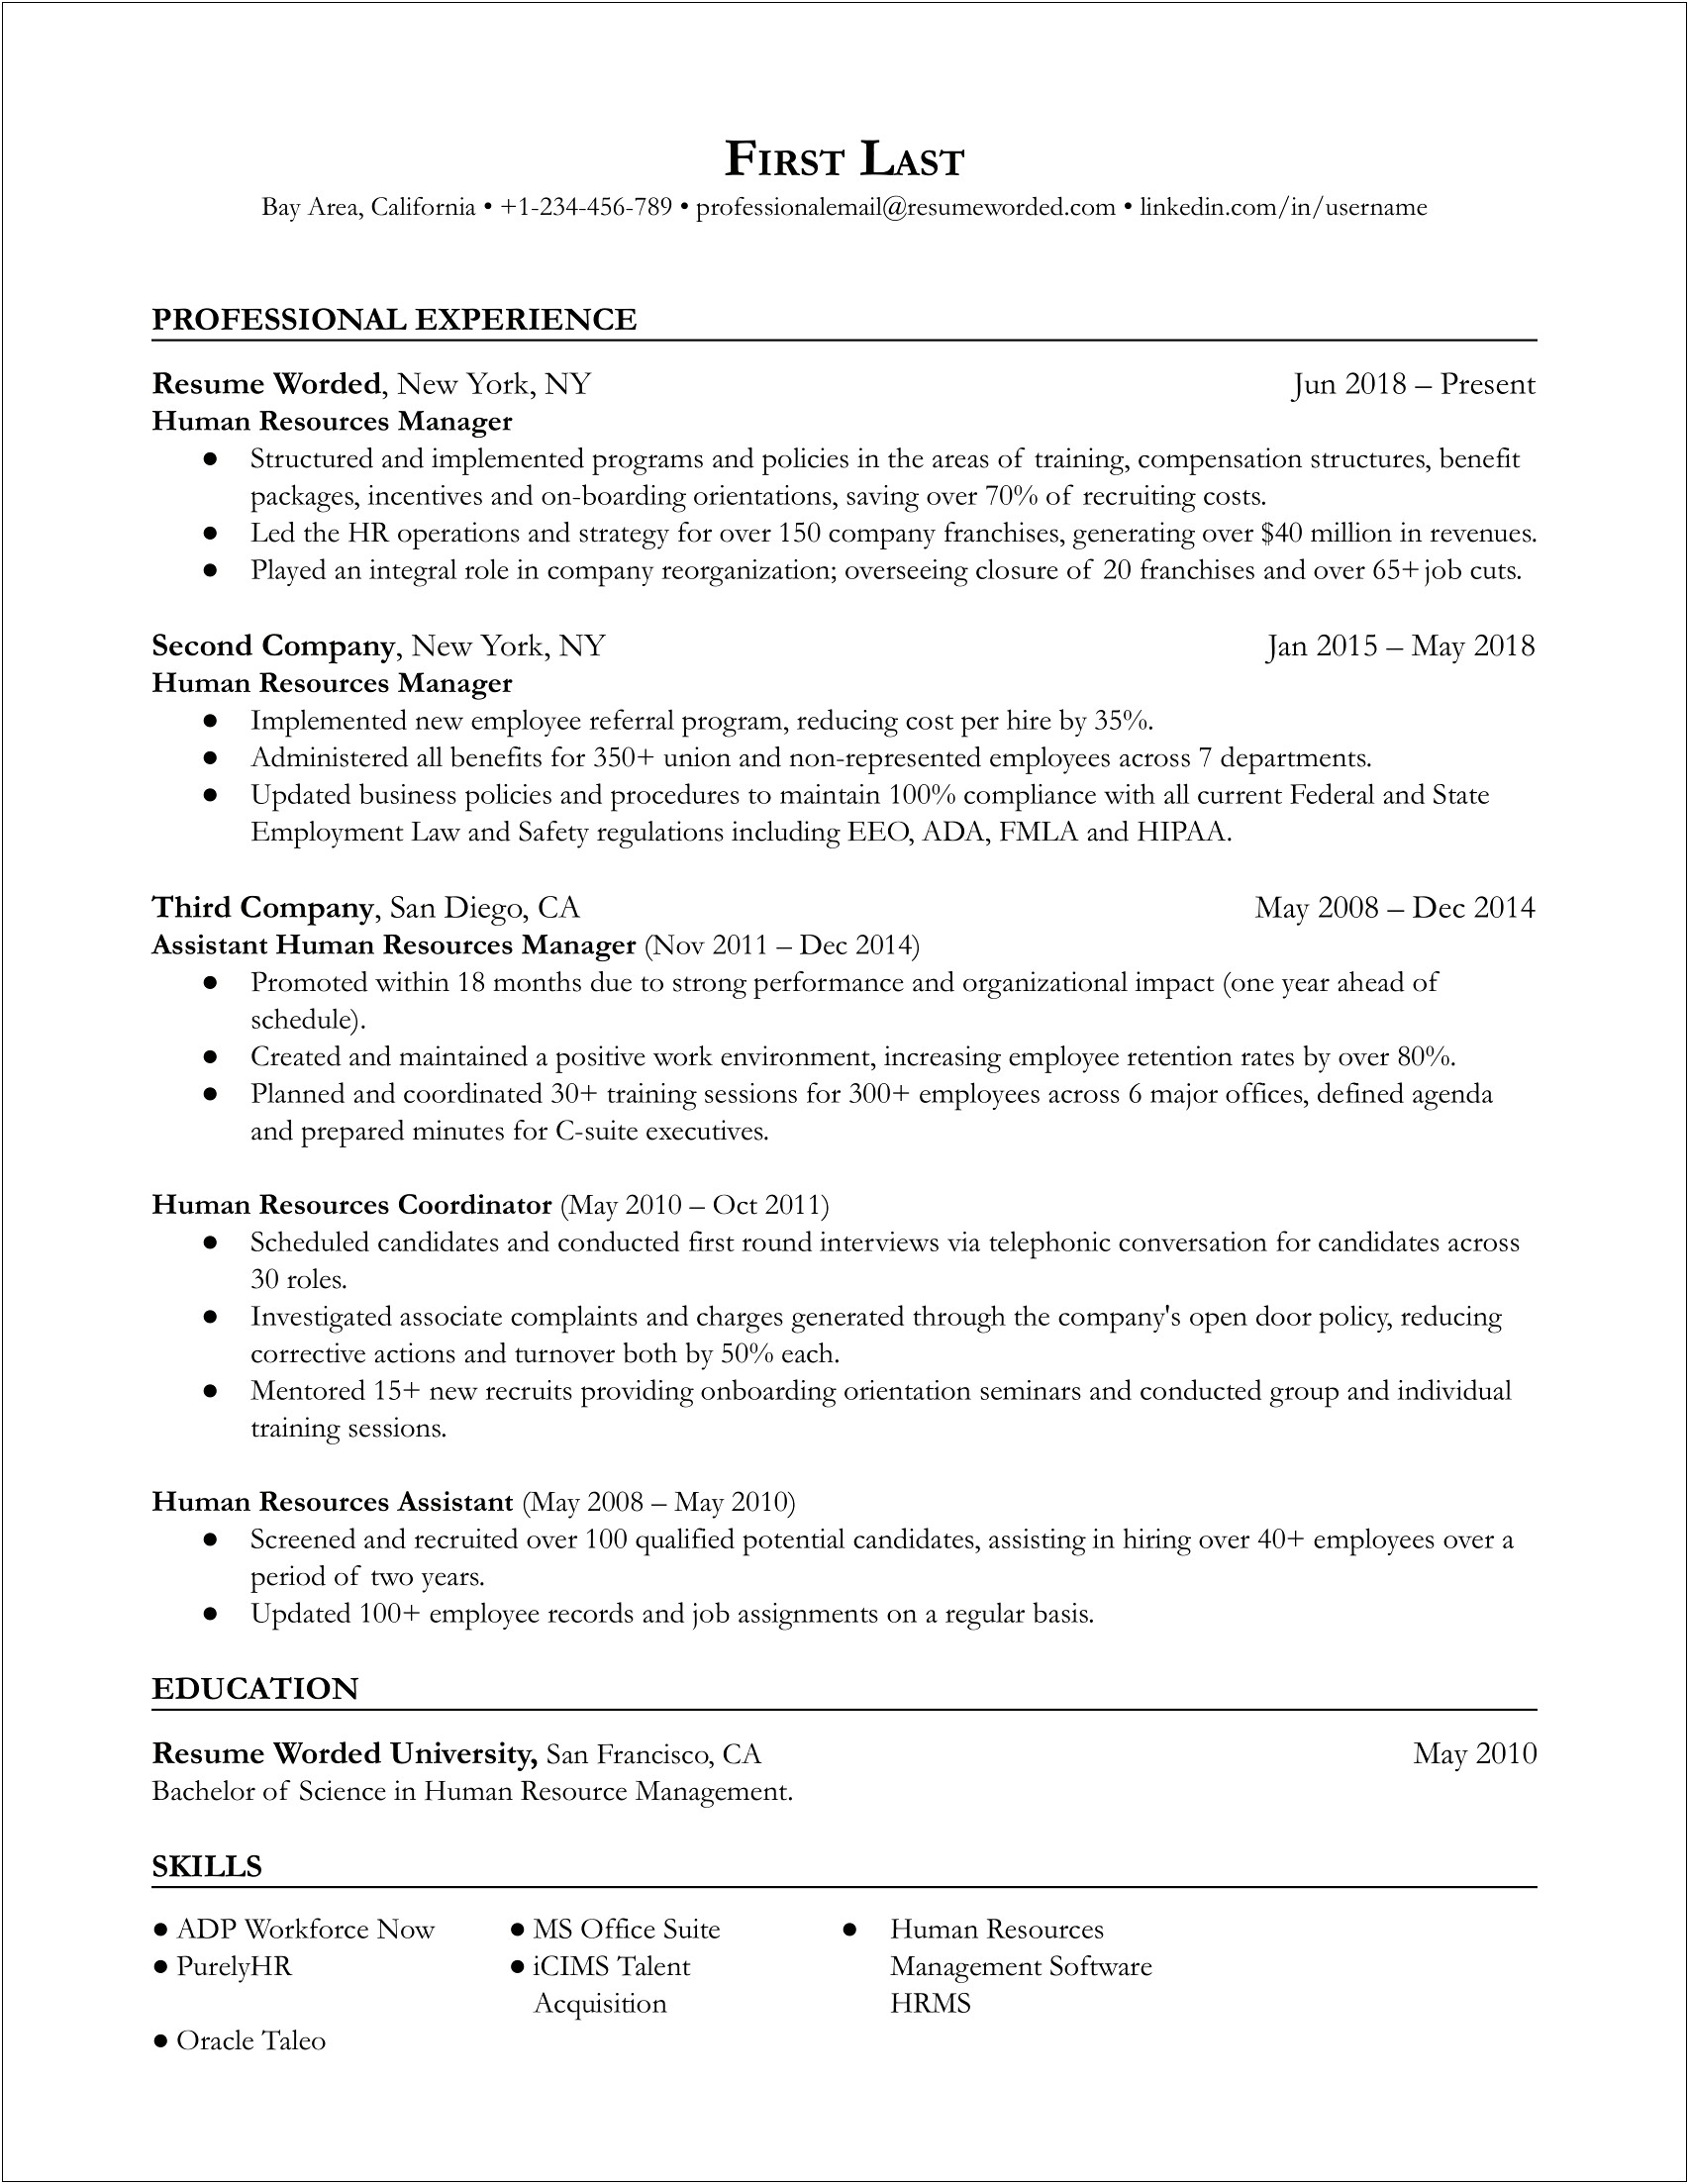 Hr Resume Sample For 2 Years Experience Doc